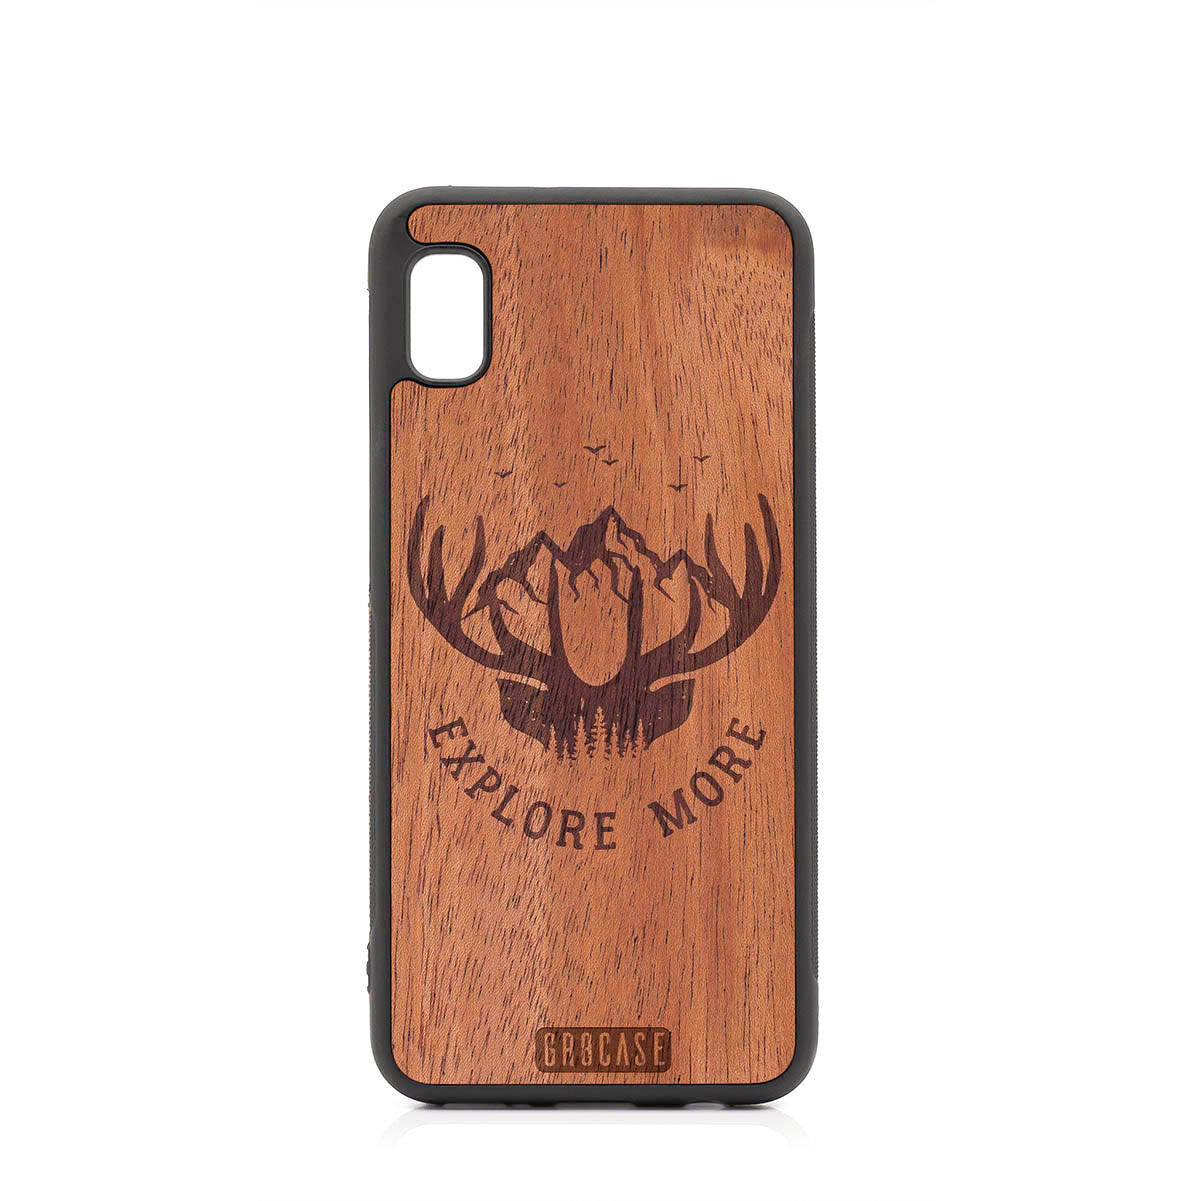 Explore More (Forest, Mountains & Antlers) Design Wood Case For Samsung Galaxy A10E by GR8CASE